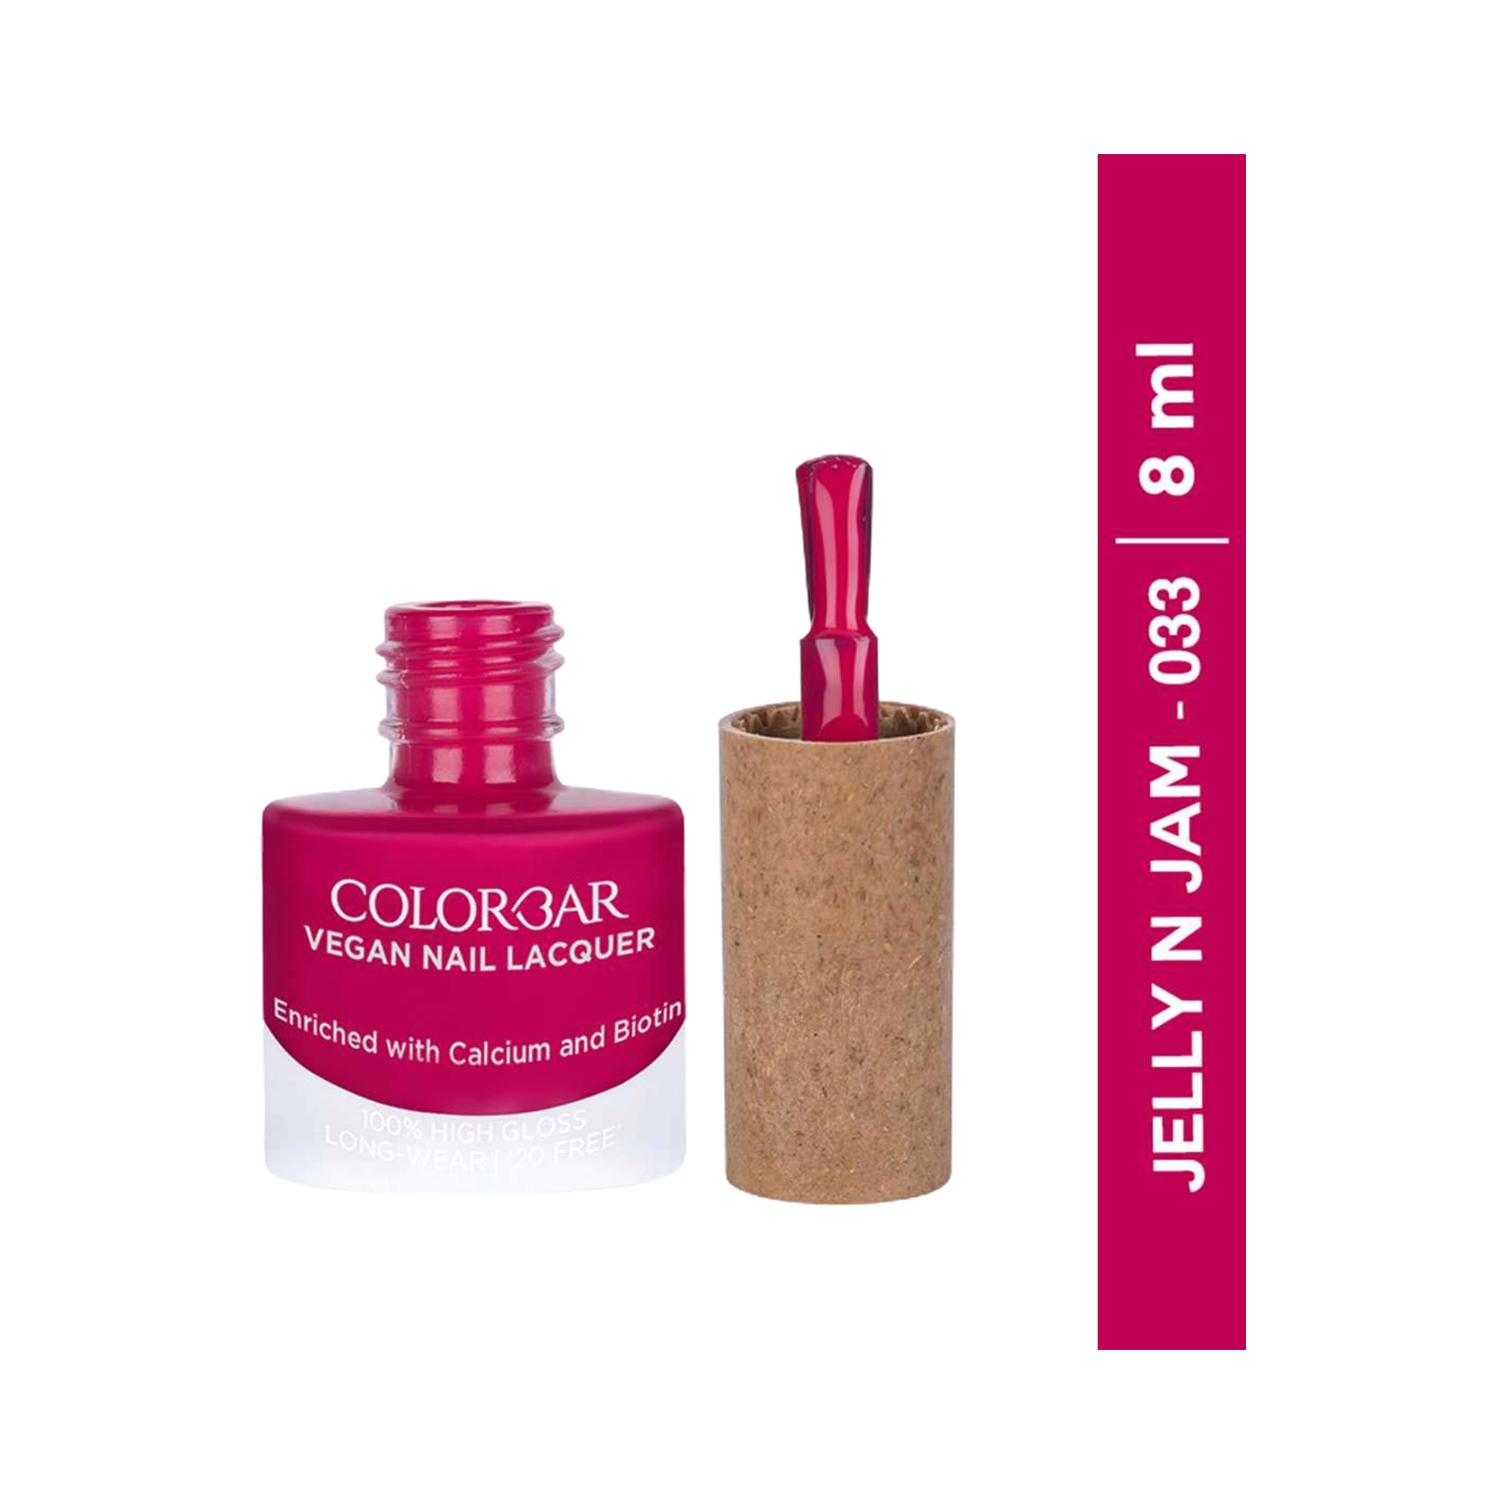 Buy Colorbar Vegan Nail Lacquer - The Foundation, 8ml Online at Low Prices  in India - Amazon.in